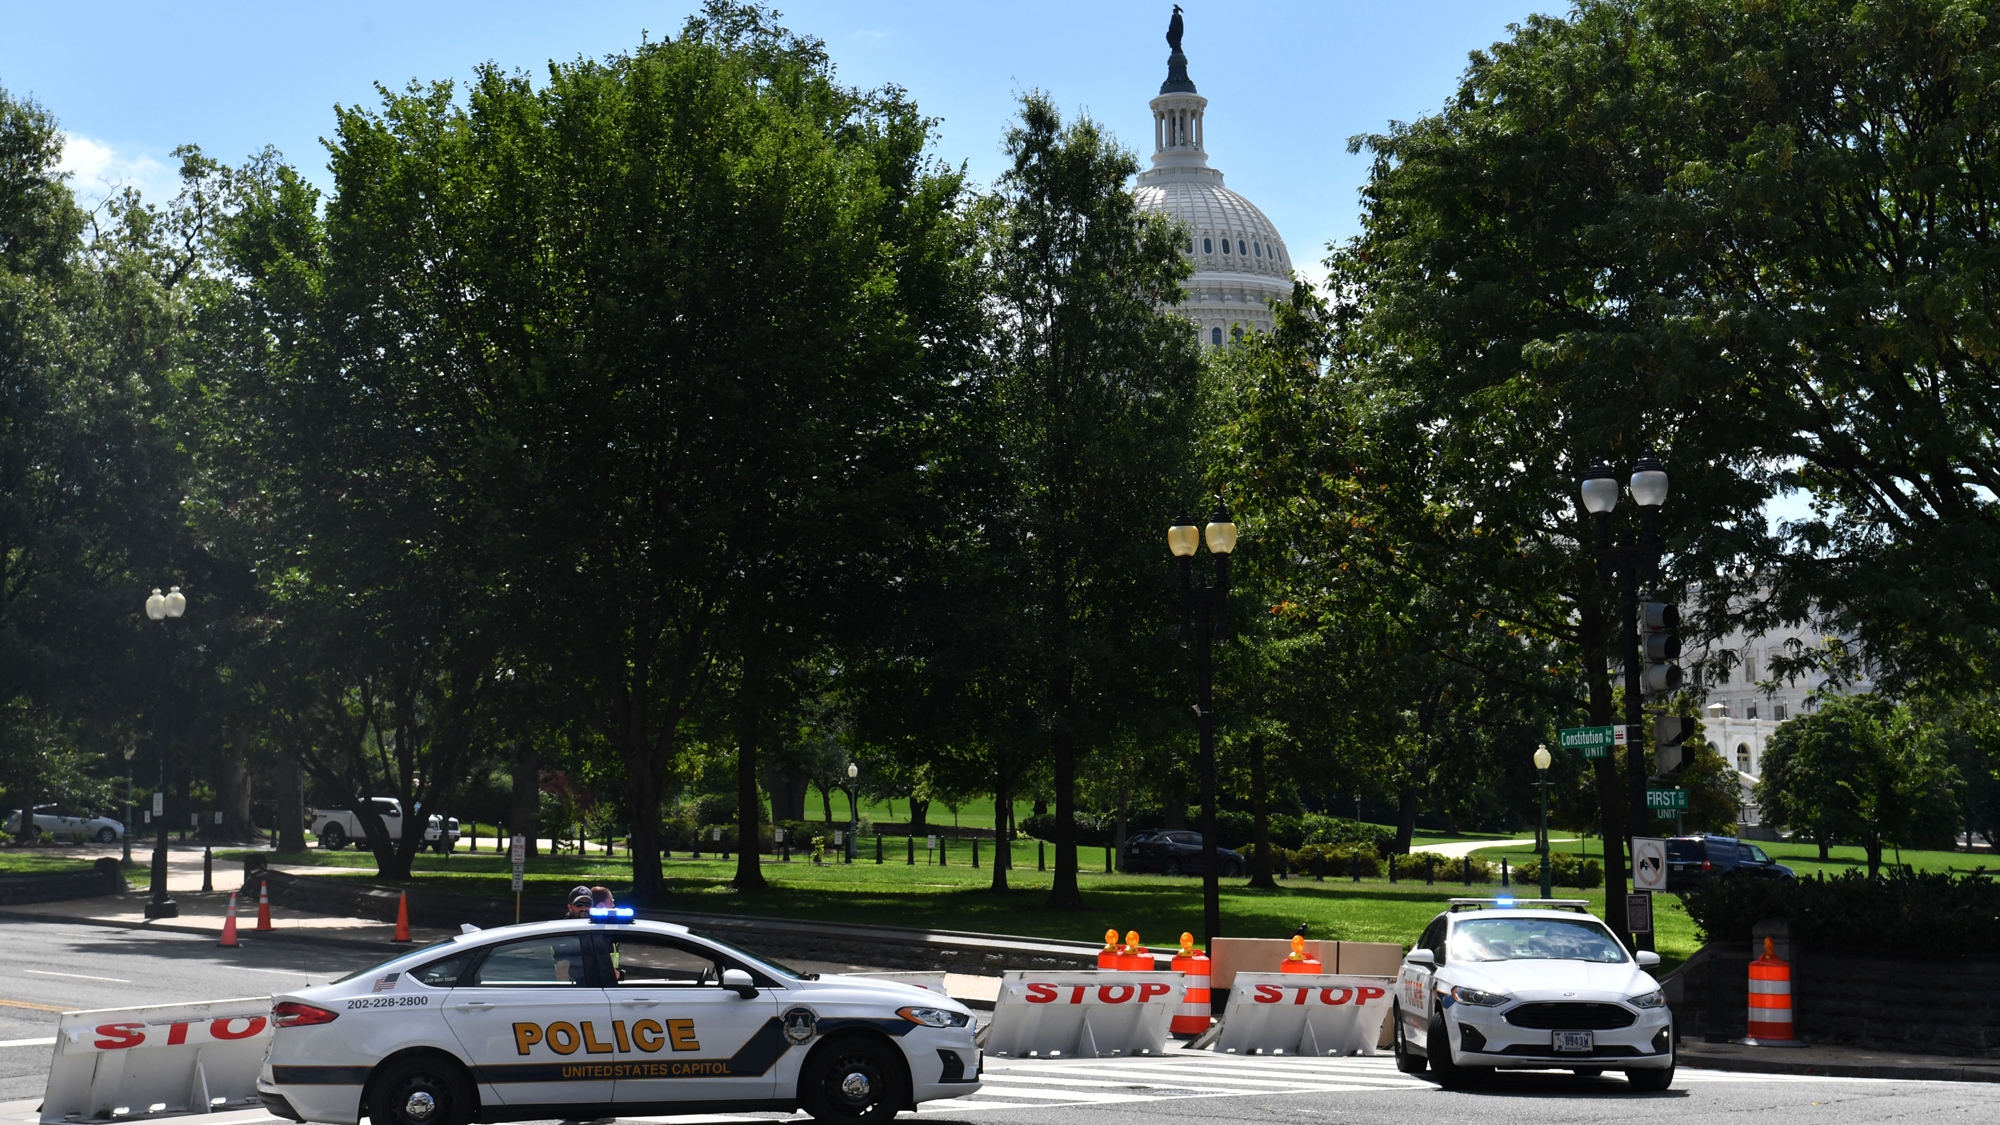 North Carolina man pleads guilty for 2021 bomb threat near Library of Congress